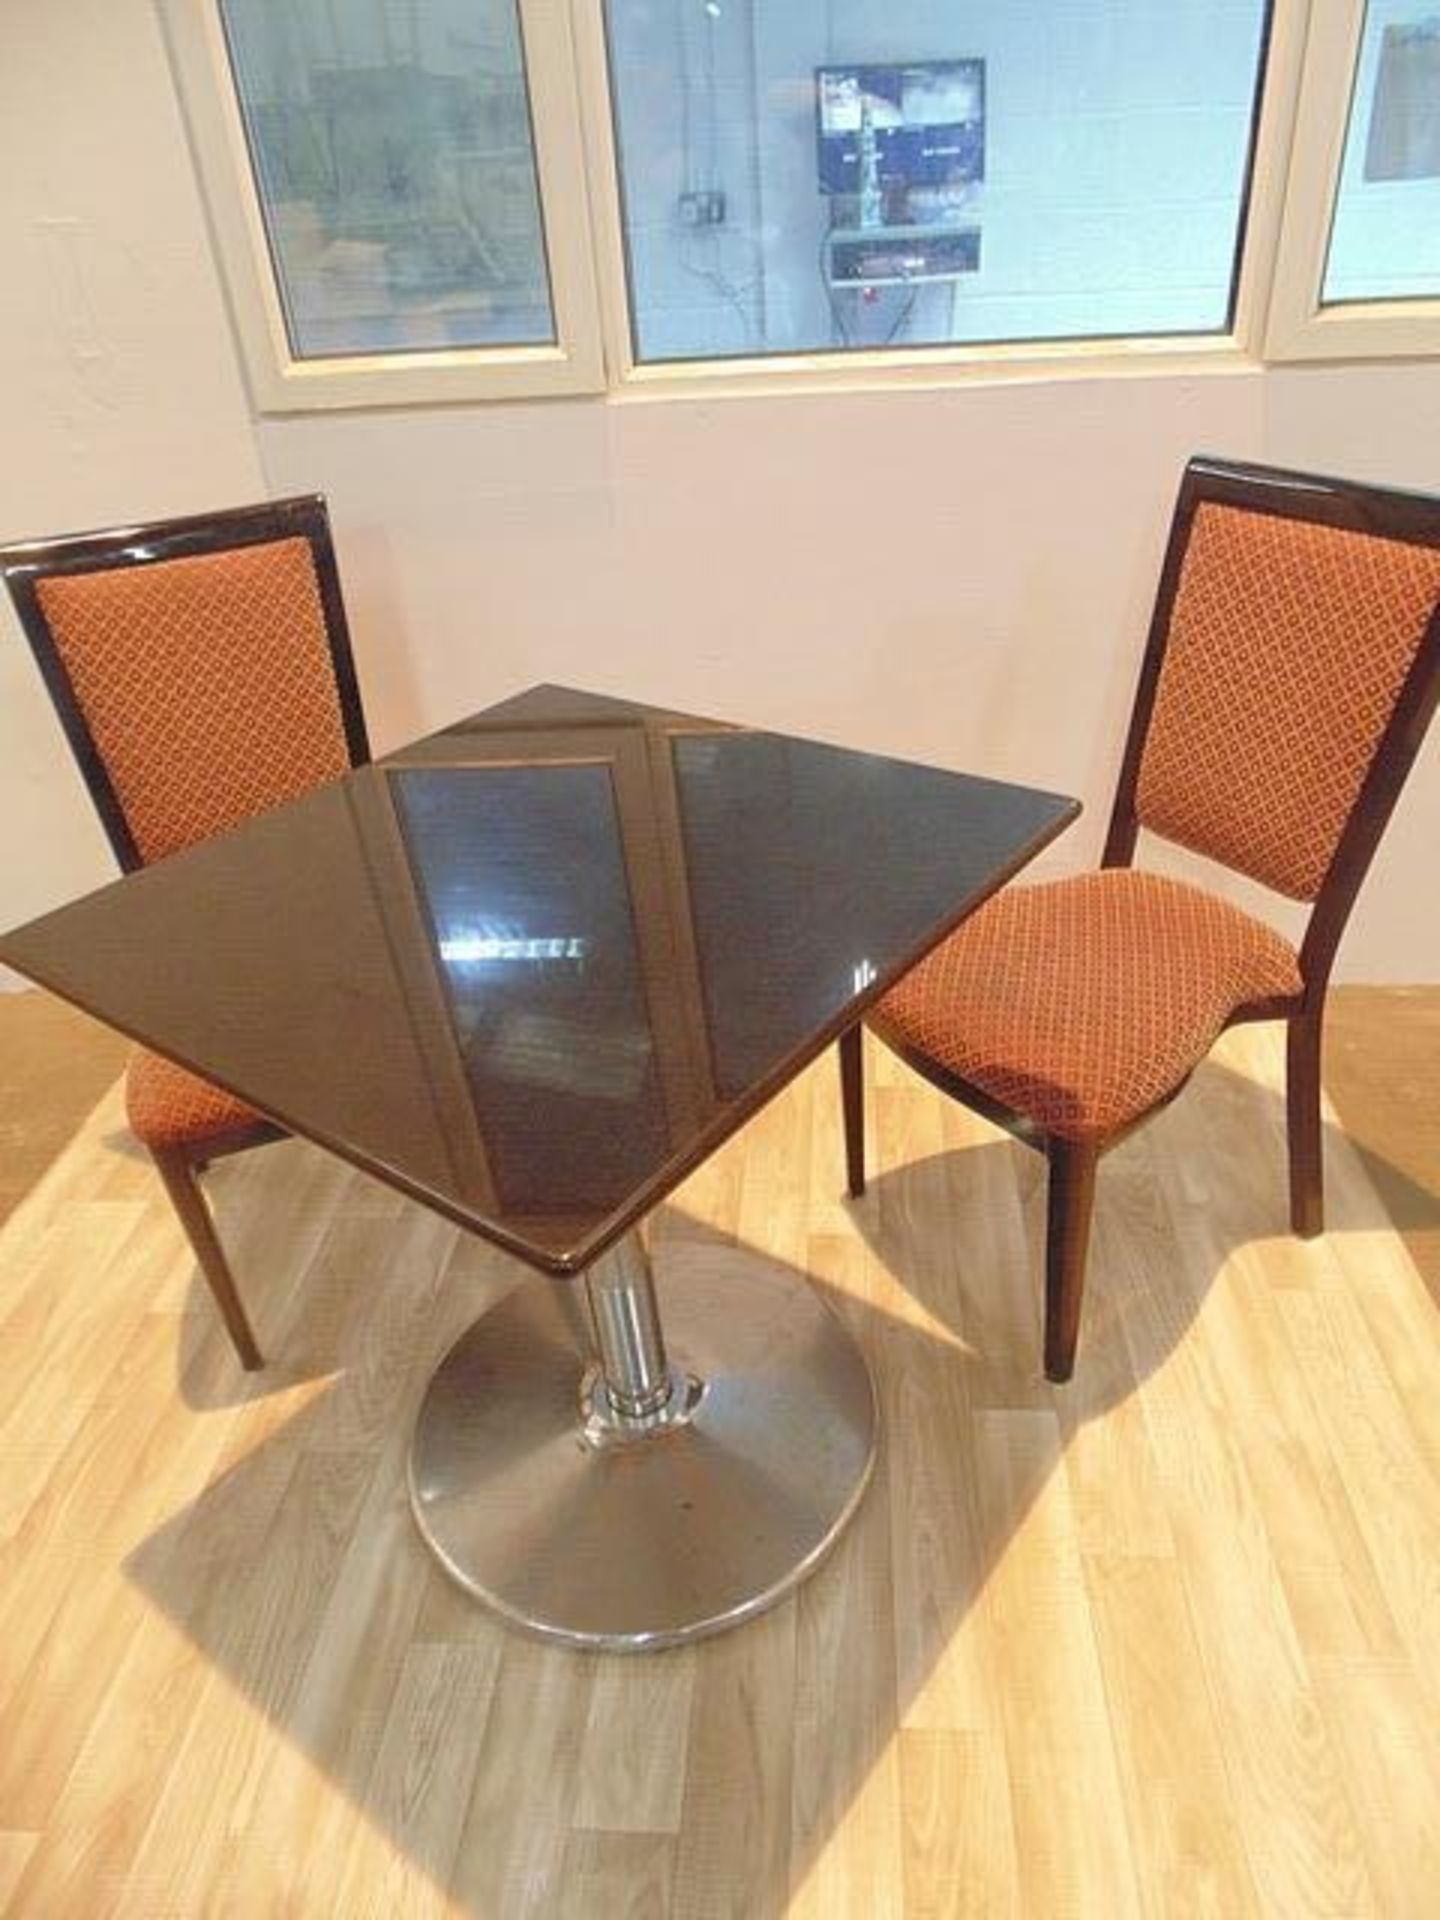 Black granite round top dining table with stainless steel pedestal complete with two side chairs